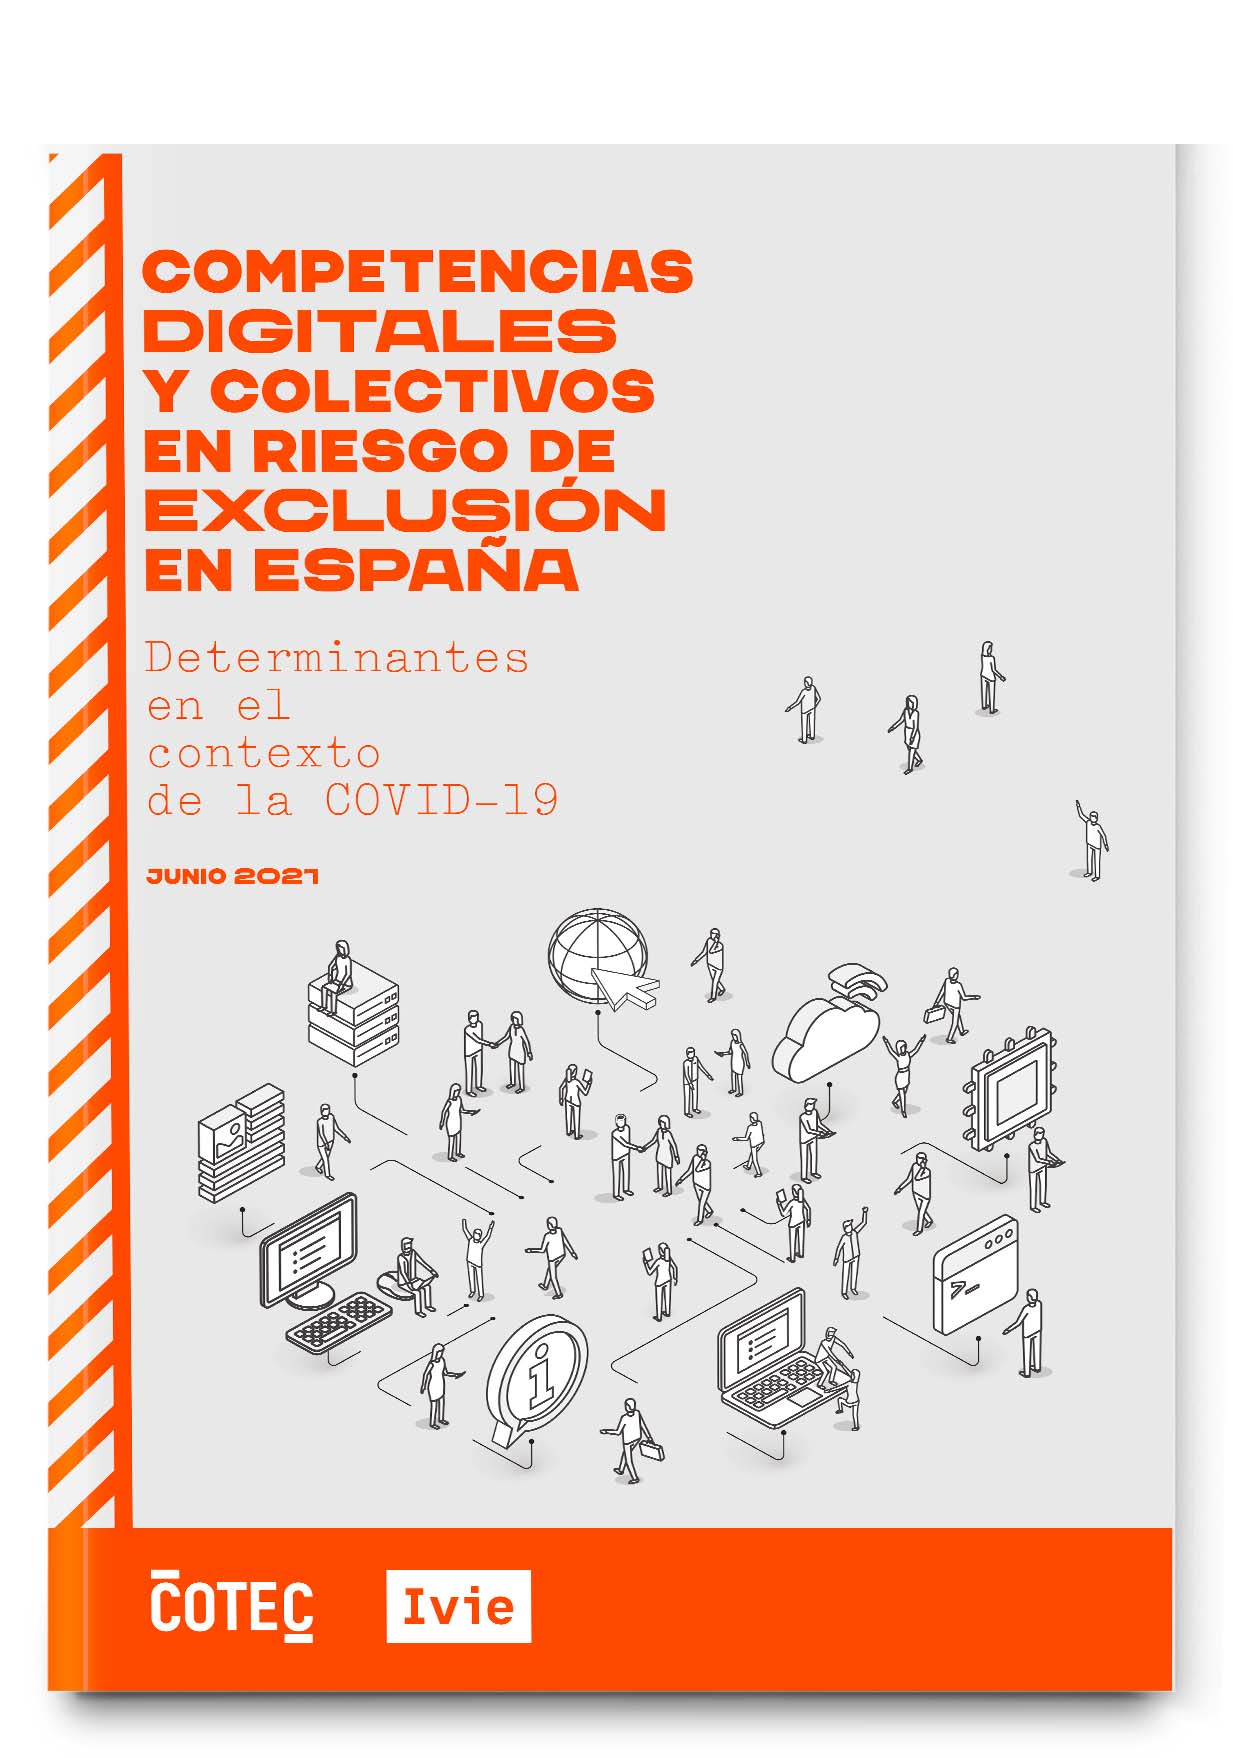 Digital skills and groups at risk of exclusion: changes in the 2019-2020 determinants as a result of COVID-19